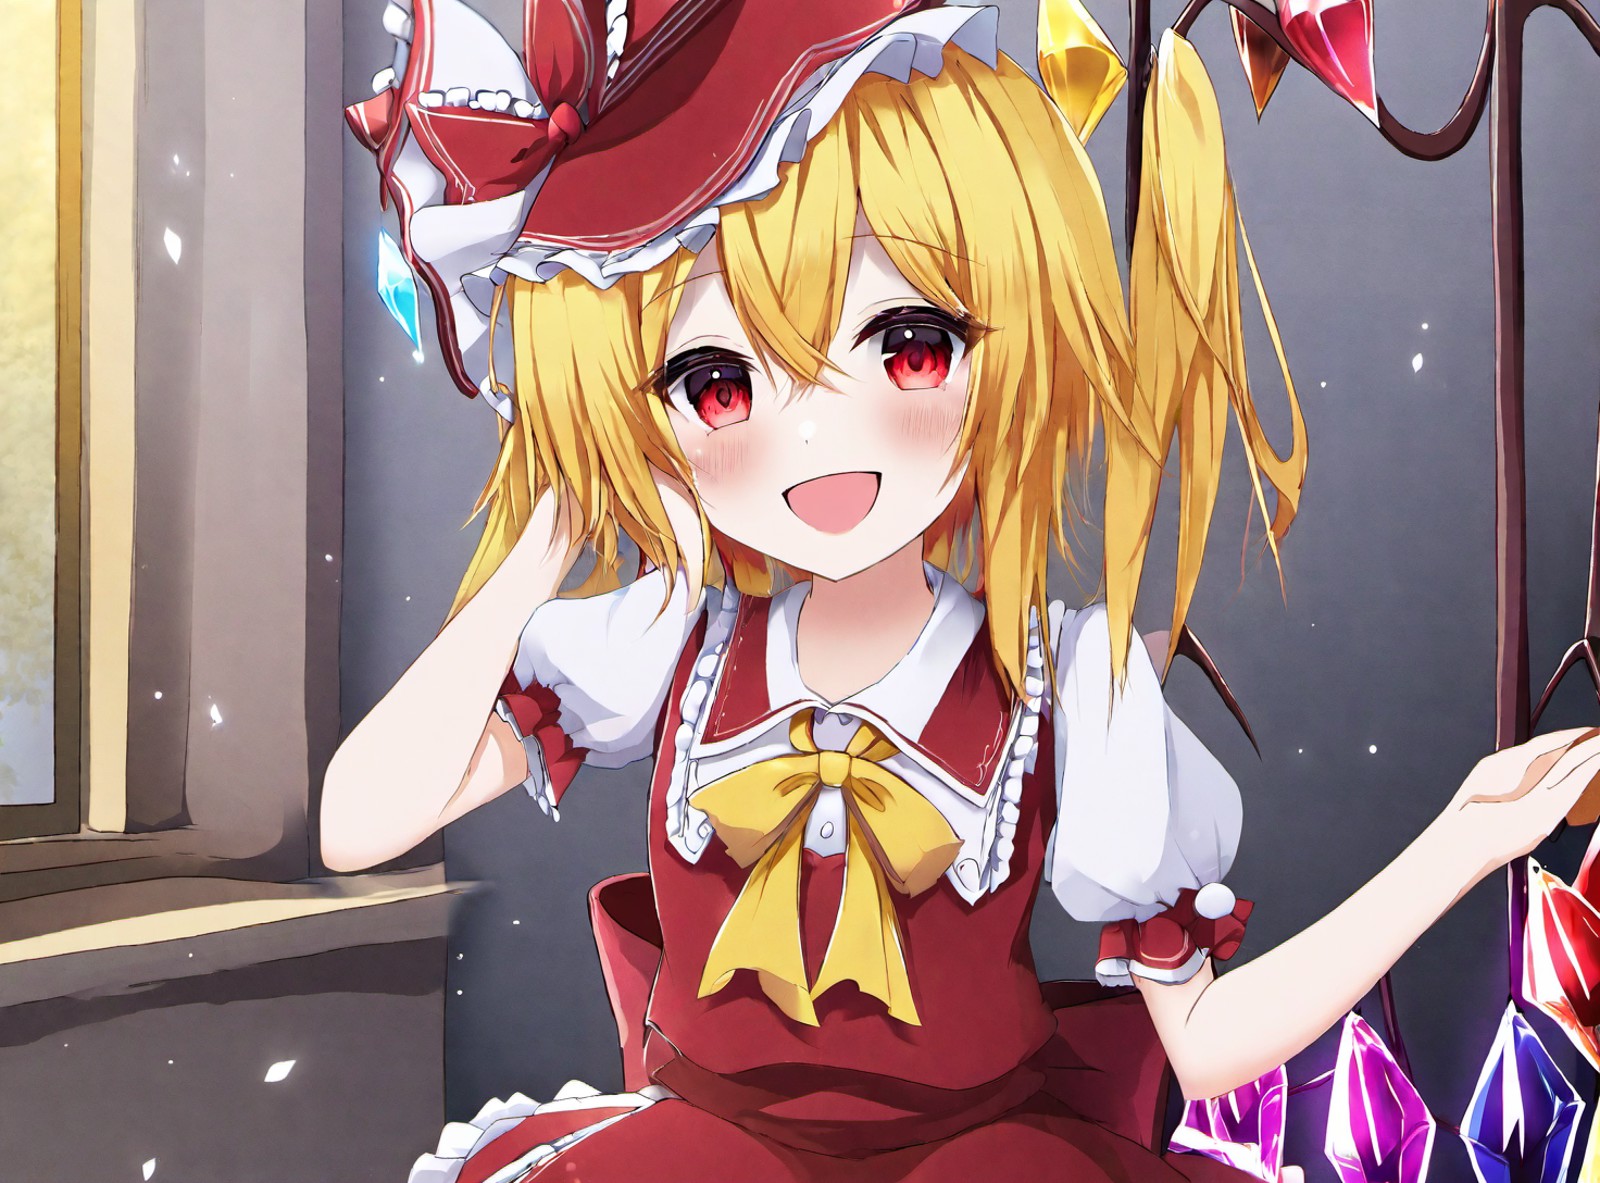 A girl flandre scarlet has red eyes, yellow hair, and fair skin. She is wearing a red and white dress with a yellow bow. S...